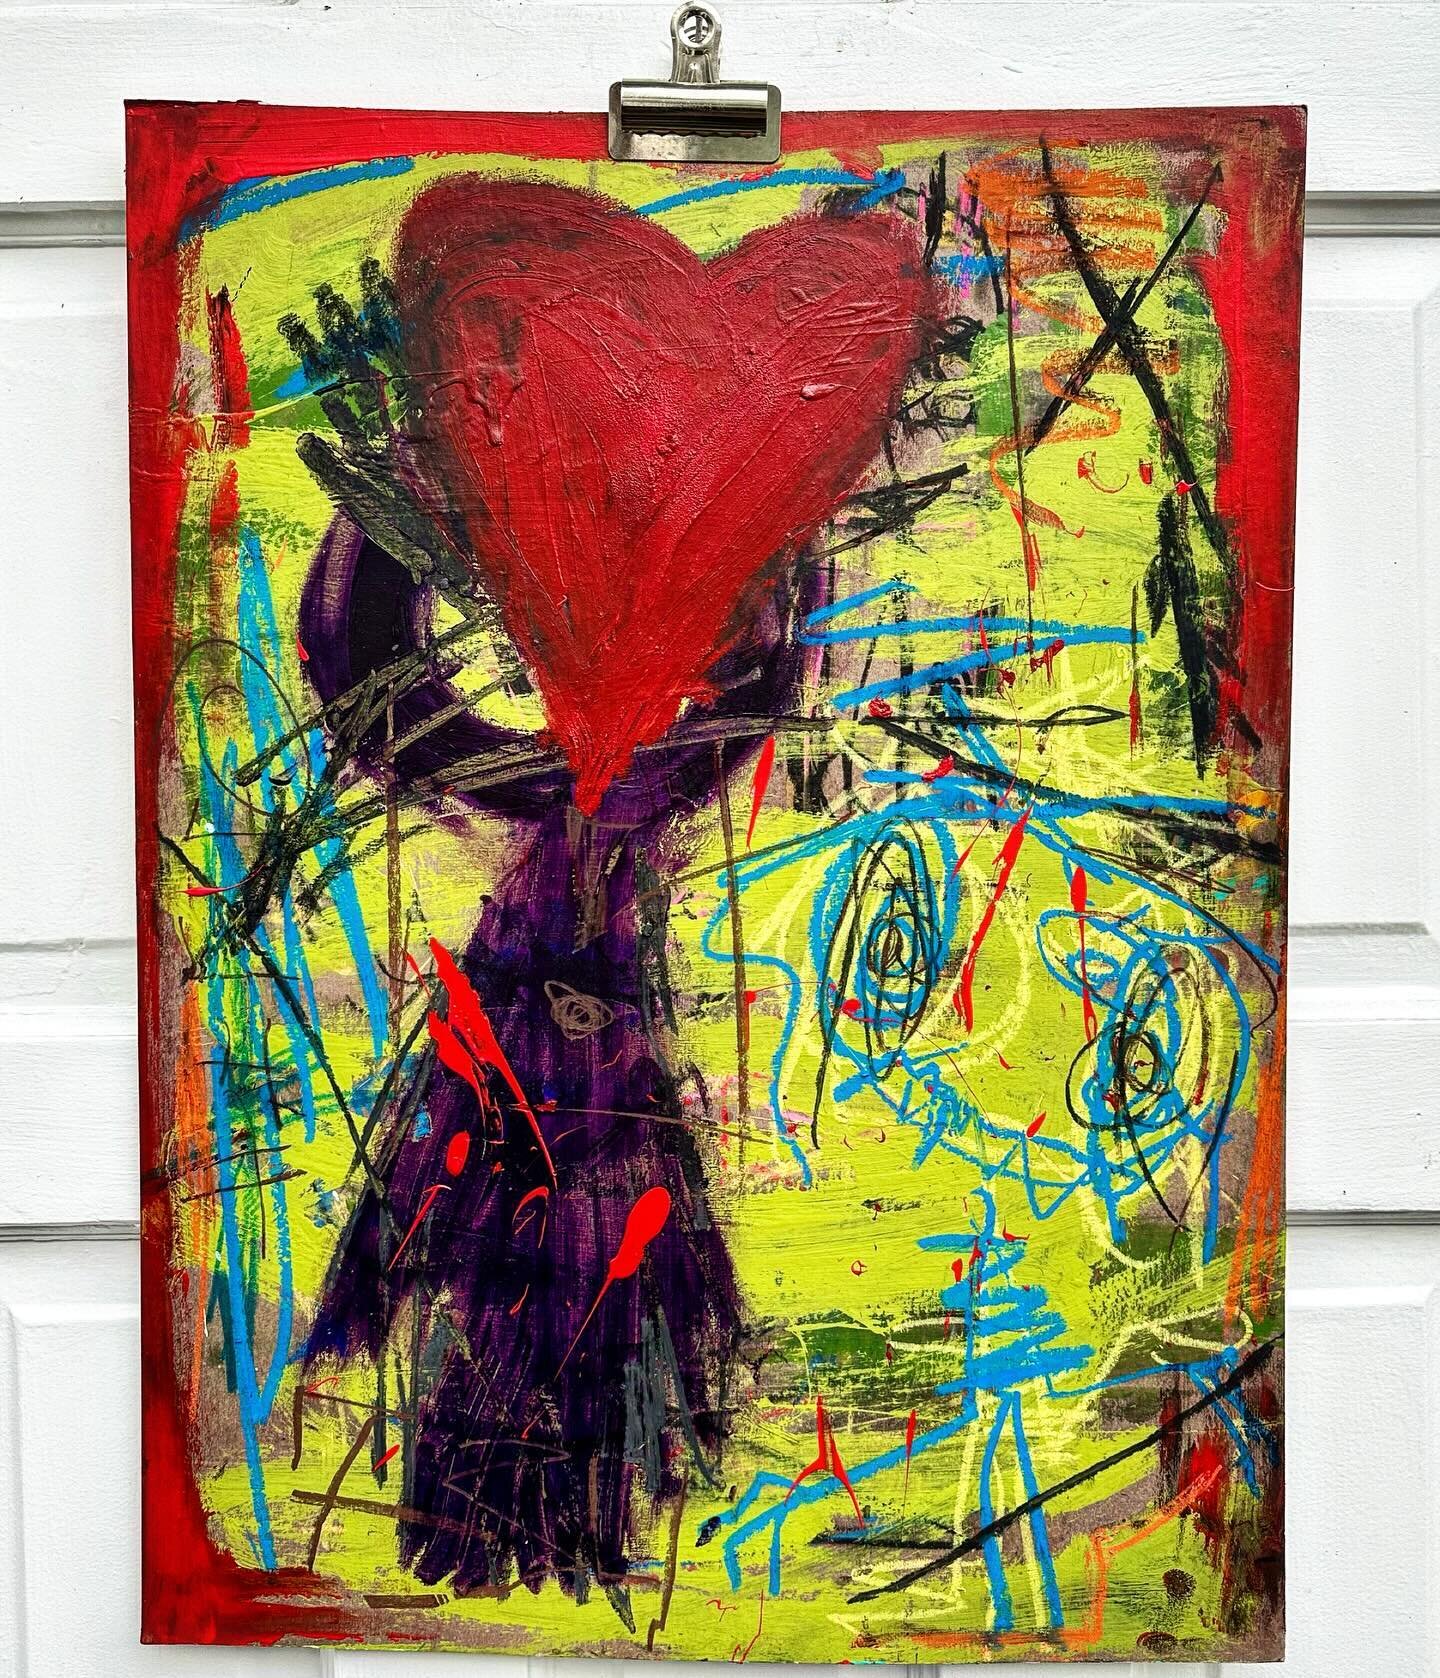 Lettin&rsquo; It Out // $60 // abcorduroy.com
#art #drawing #comics #zzzwalking #abcorduroy #artforsale #magic #ink #oilpastel #acrylic #paint #charcoal #layers #texture #mixedmedia #heart